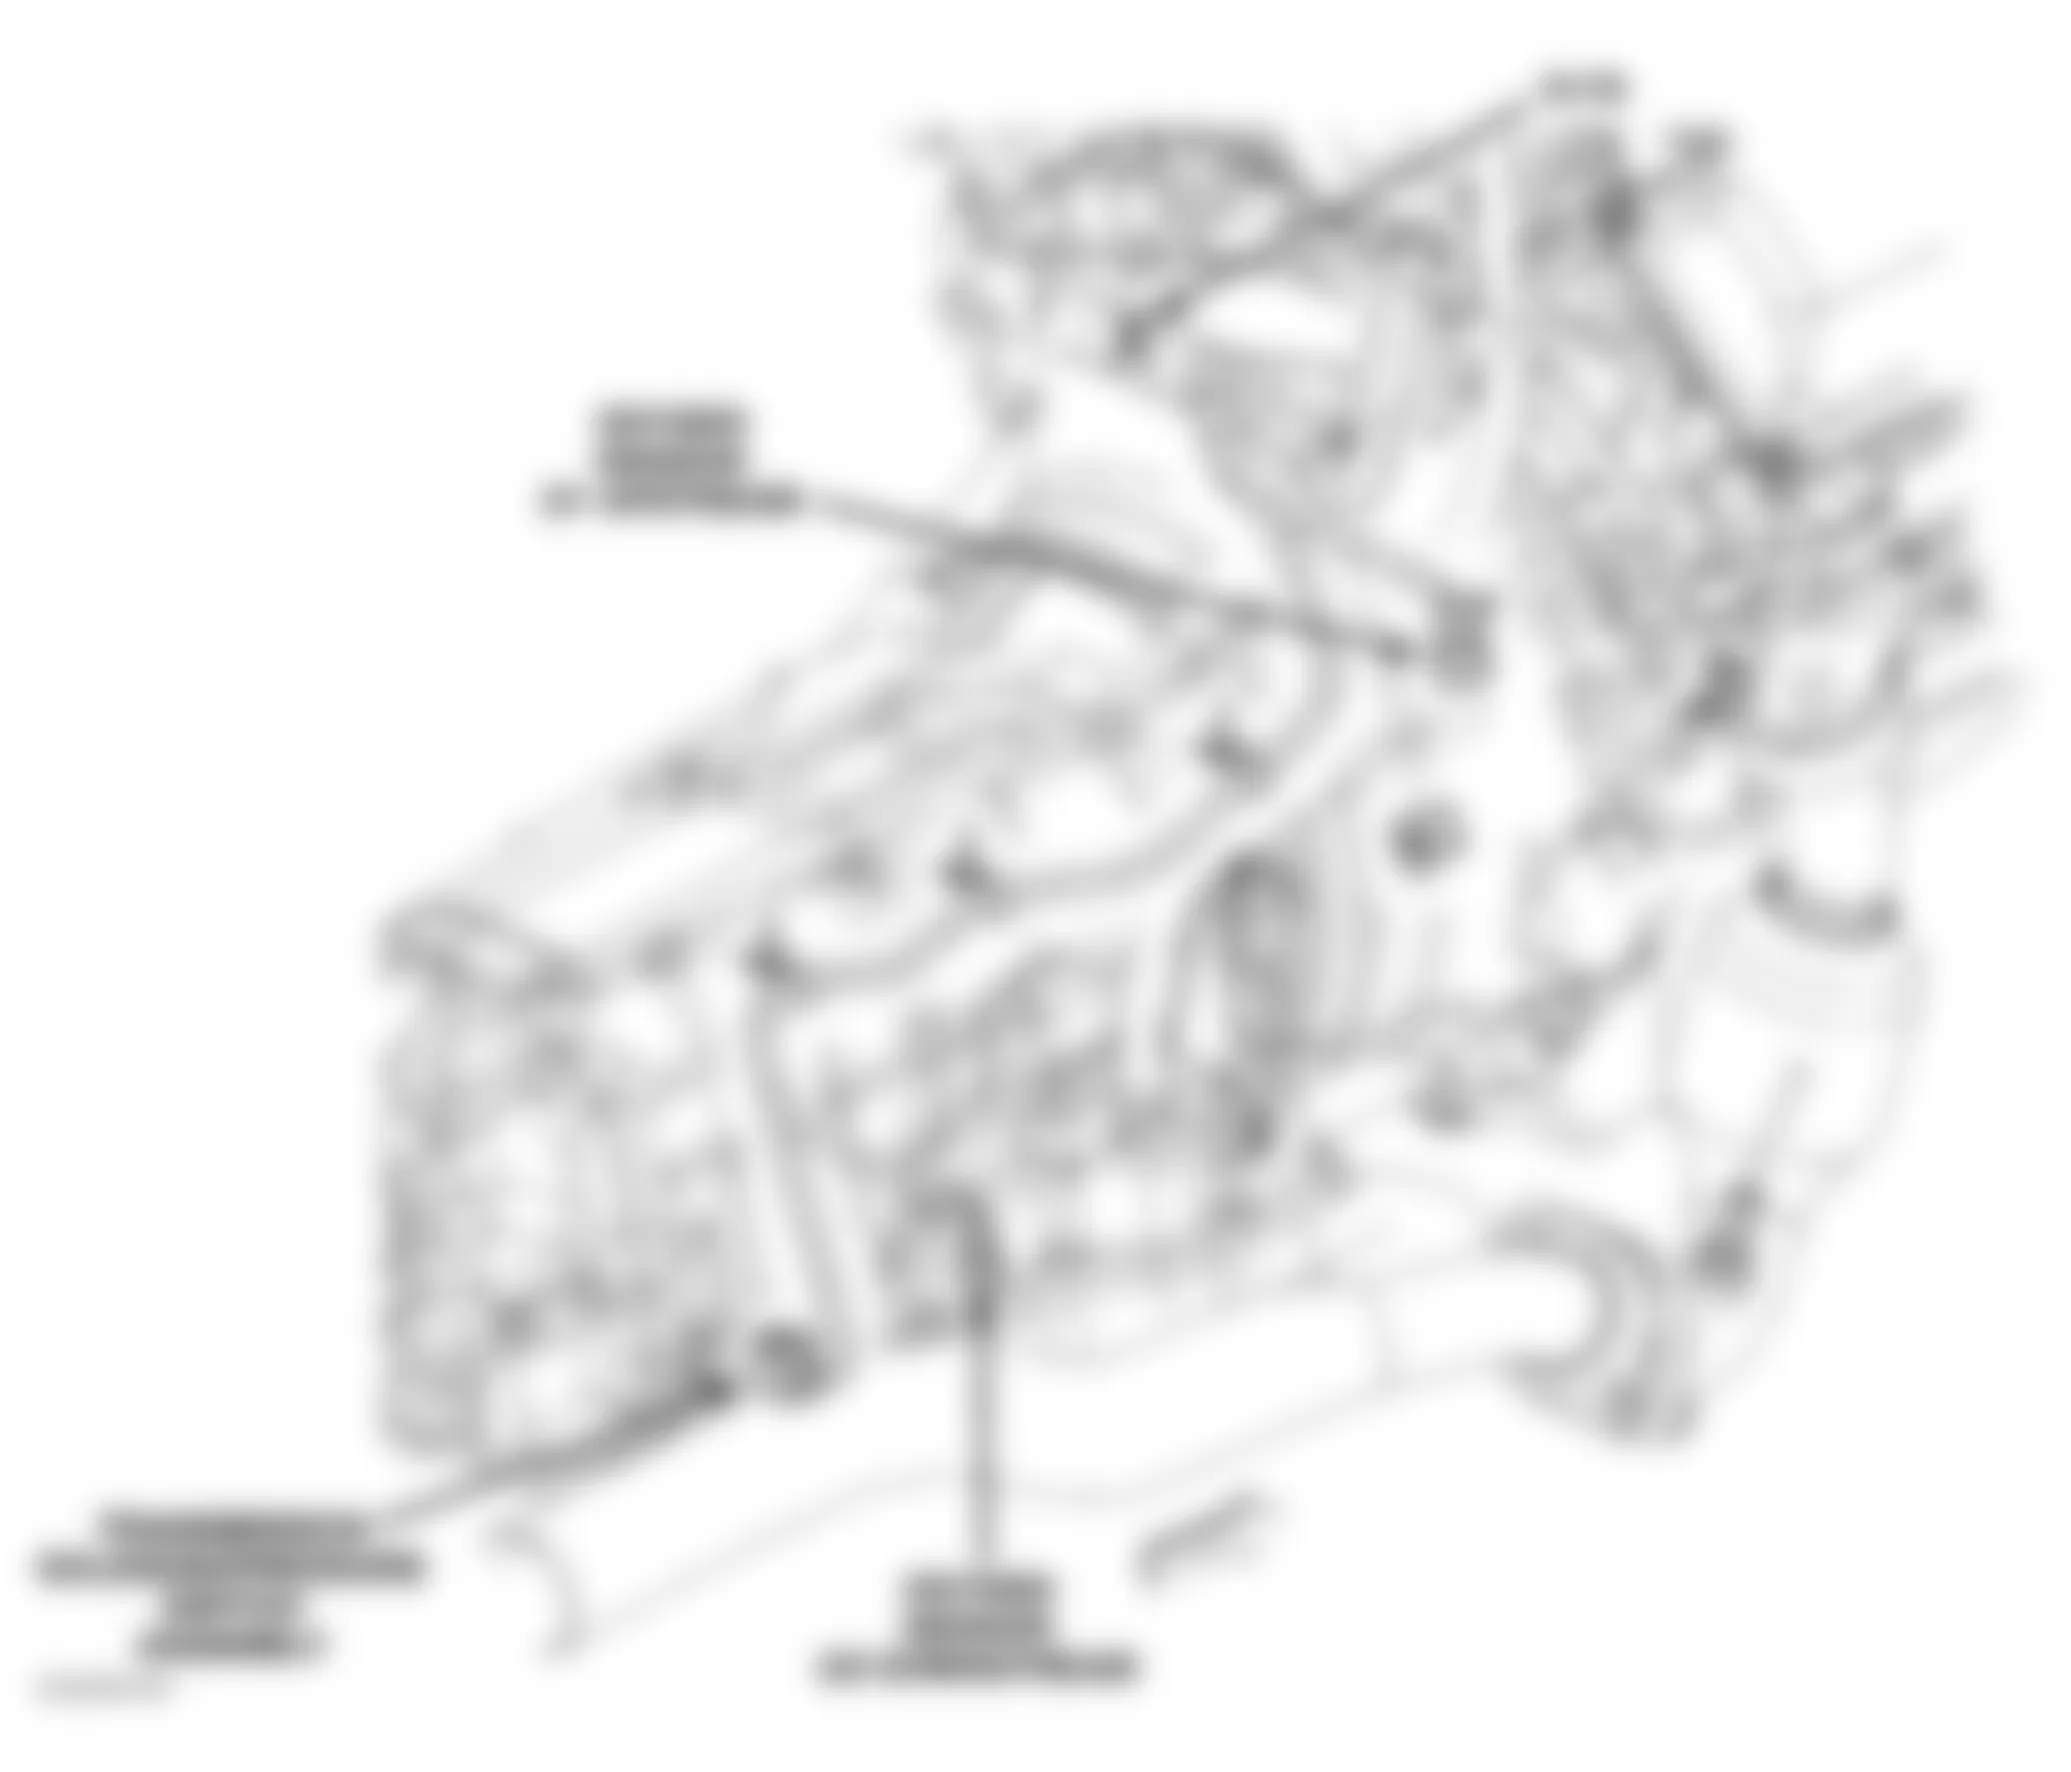 Jeep Liberty Limited 2005 - Component Locations -  Right Side Of Transmission (3.7L)